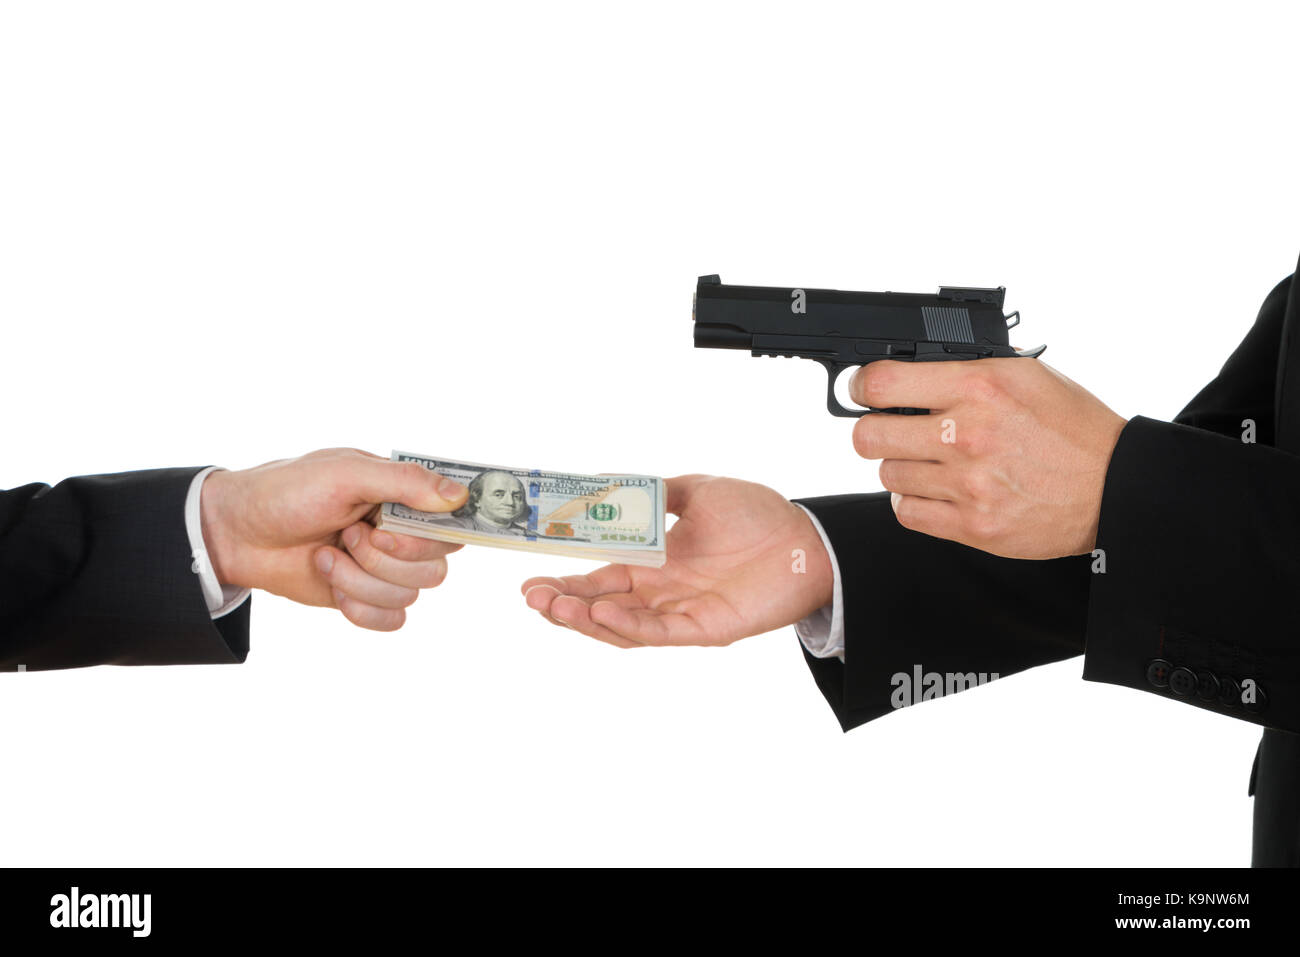 Businessman Hand Giving Money To A Person Aiming With Gun Over White Background Stock Photo